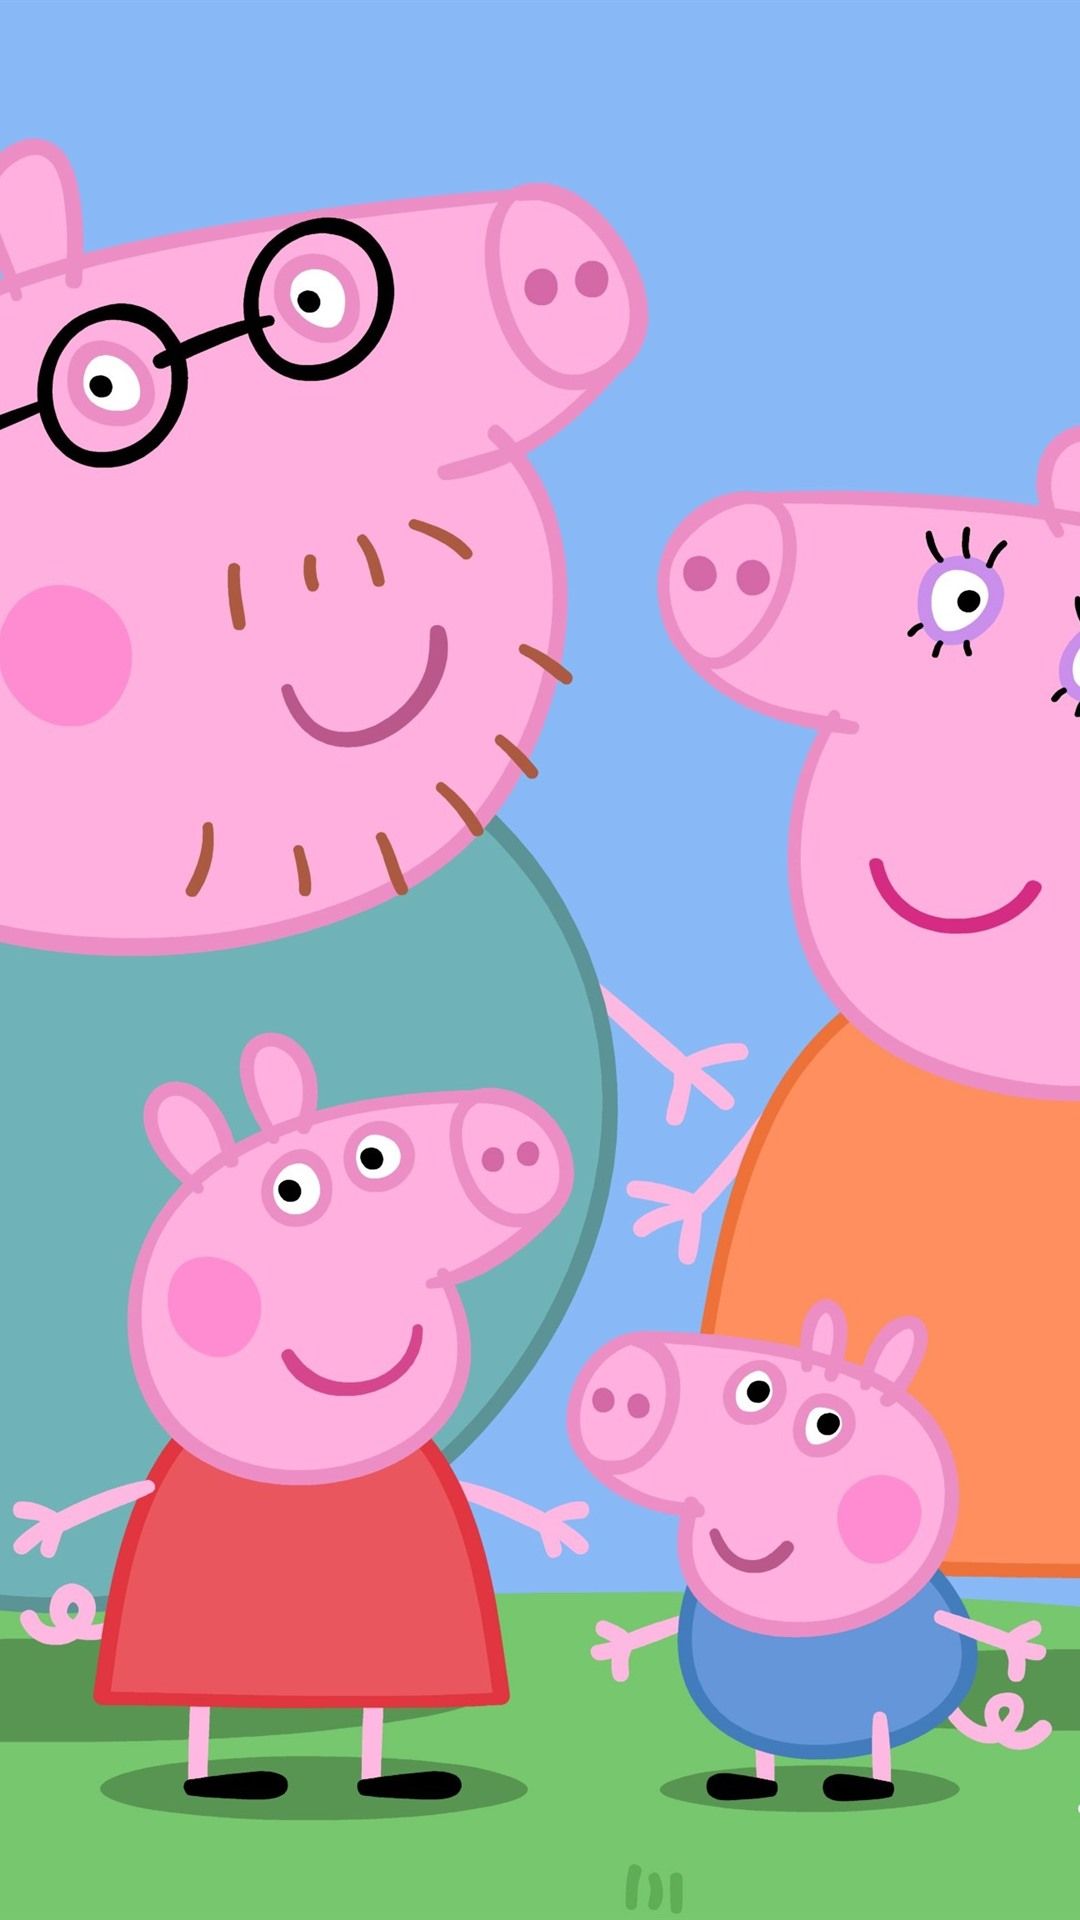 Best Peppa Pig Wallpaper for iPhone, iPad, Android 2023 Update